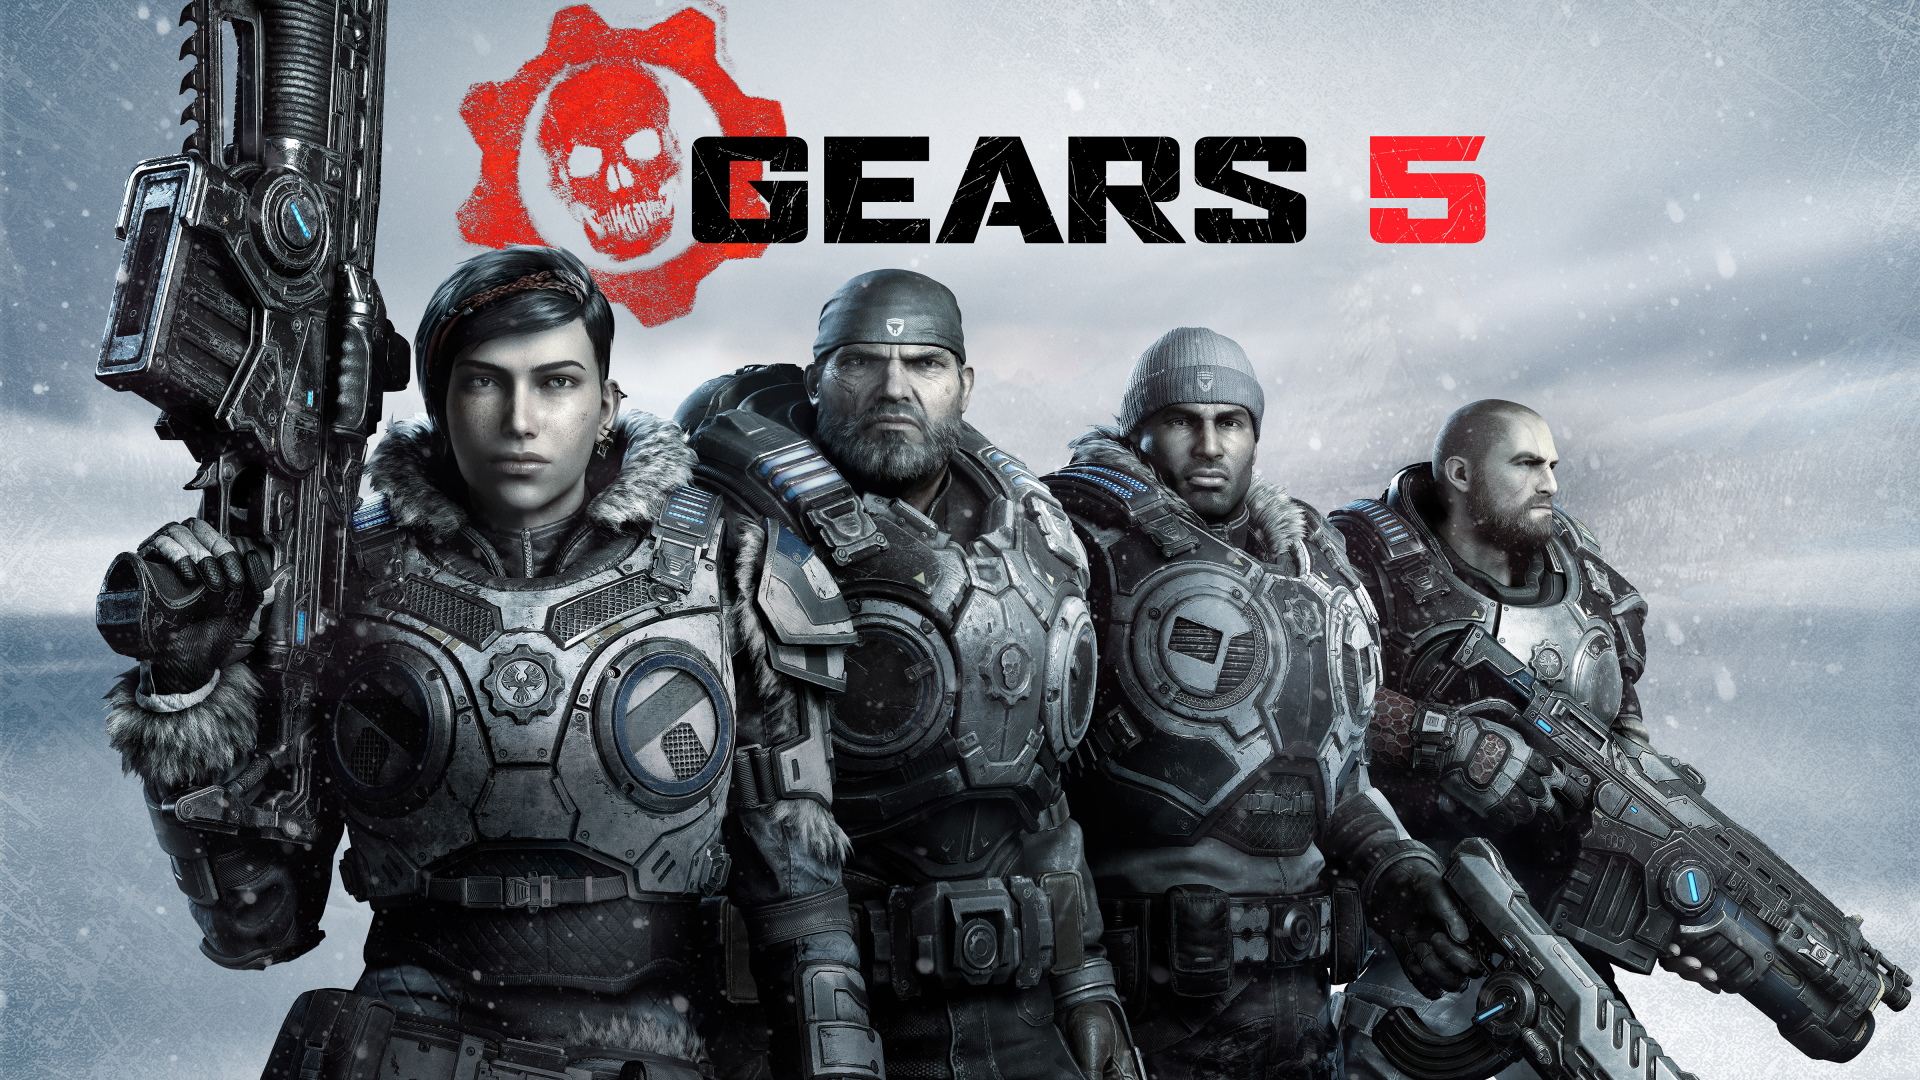 Gears Of War 4 review: It's the best looking game on Xbox One